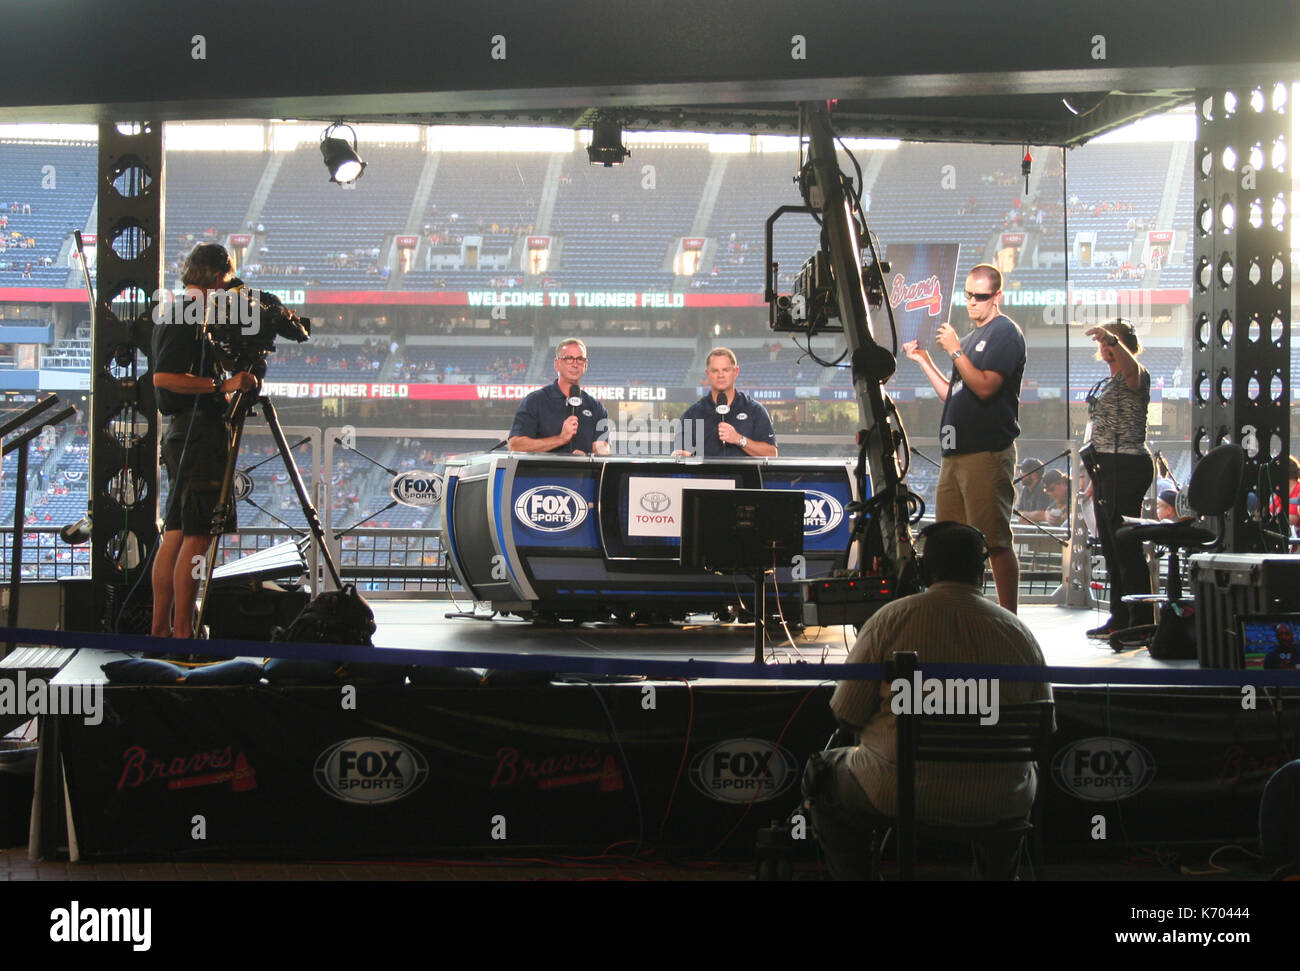 Atlanta, Georgia: August 28, 2014: The Fox news channel team prepare for a live broadcast from Turner Stadium at the Atlanta Braves game Stock Photo